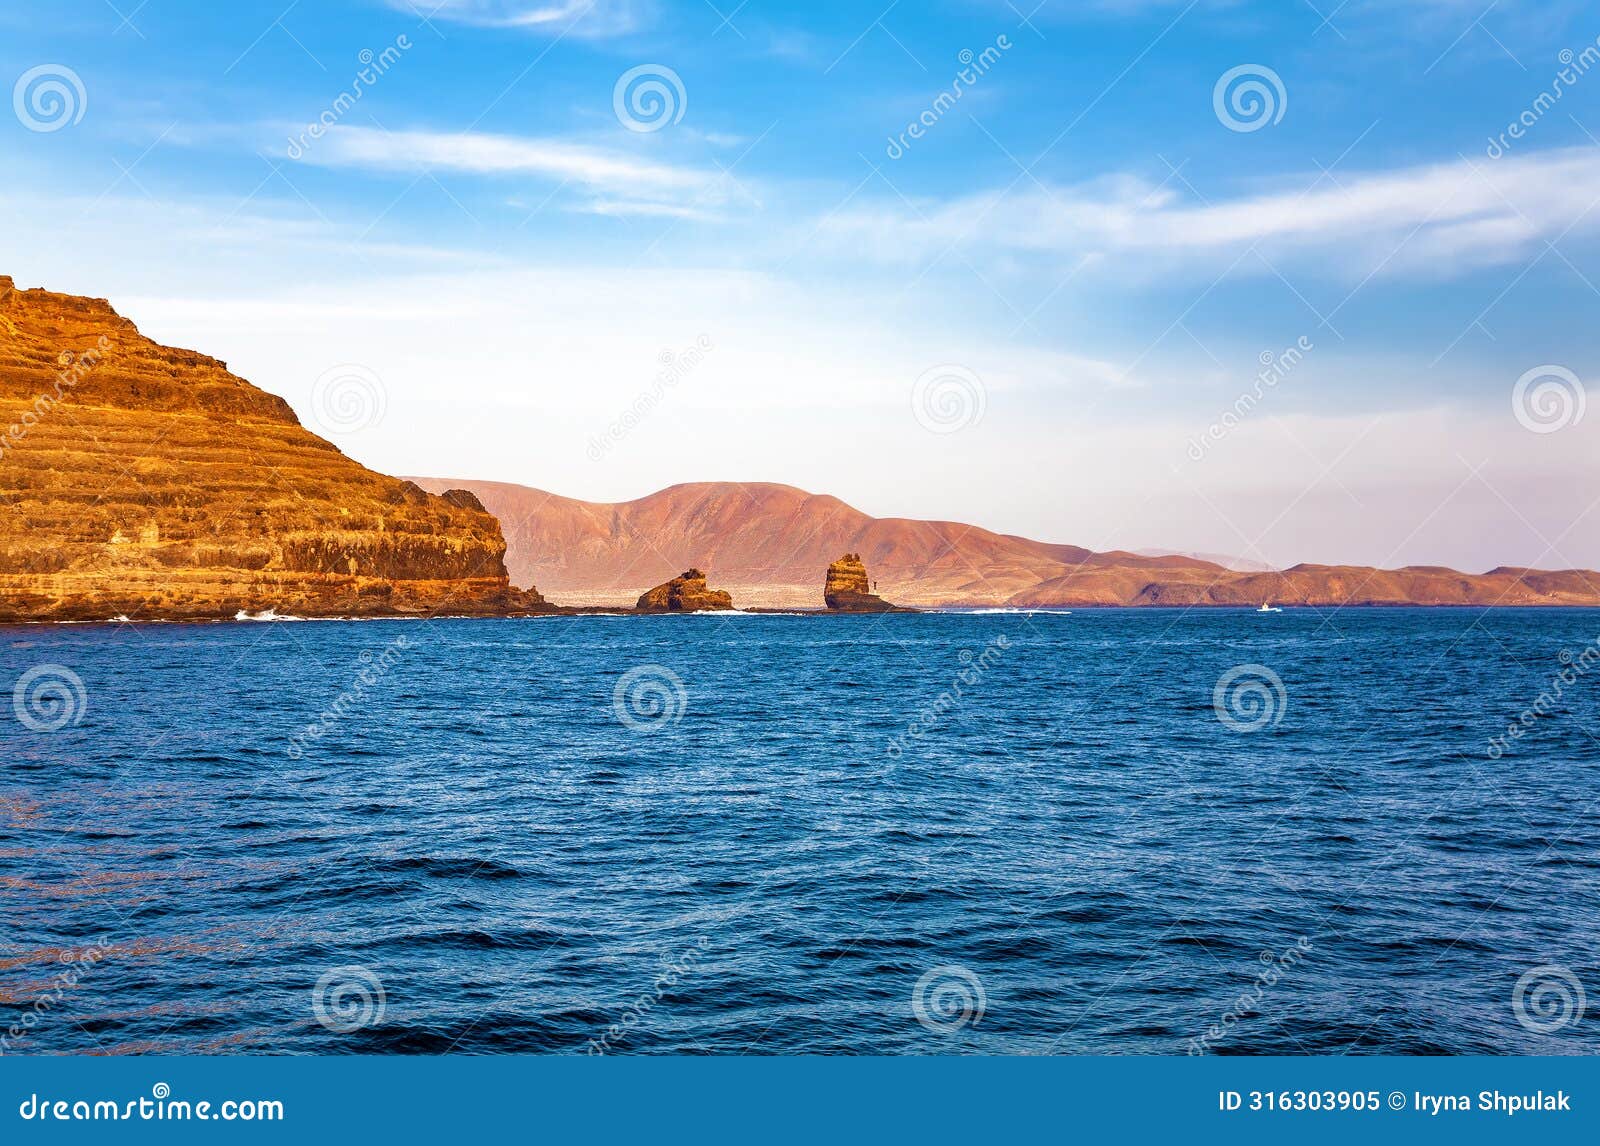 rock formations in the sea, island lanzarote, canary islands, spain, europe